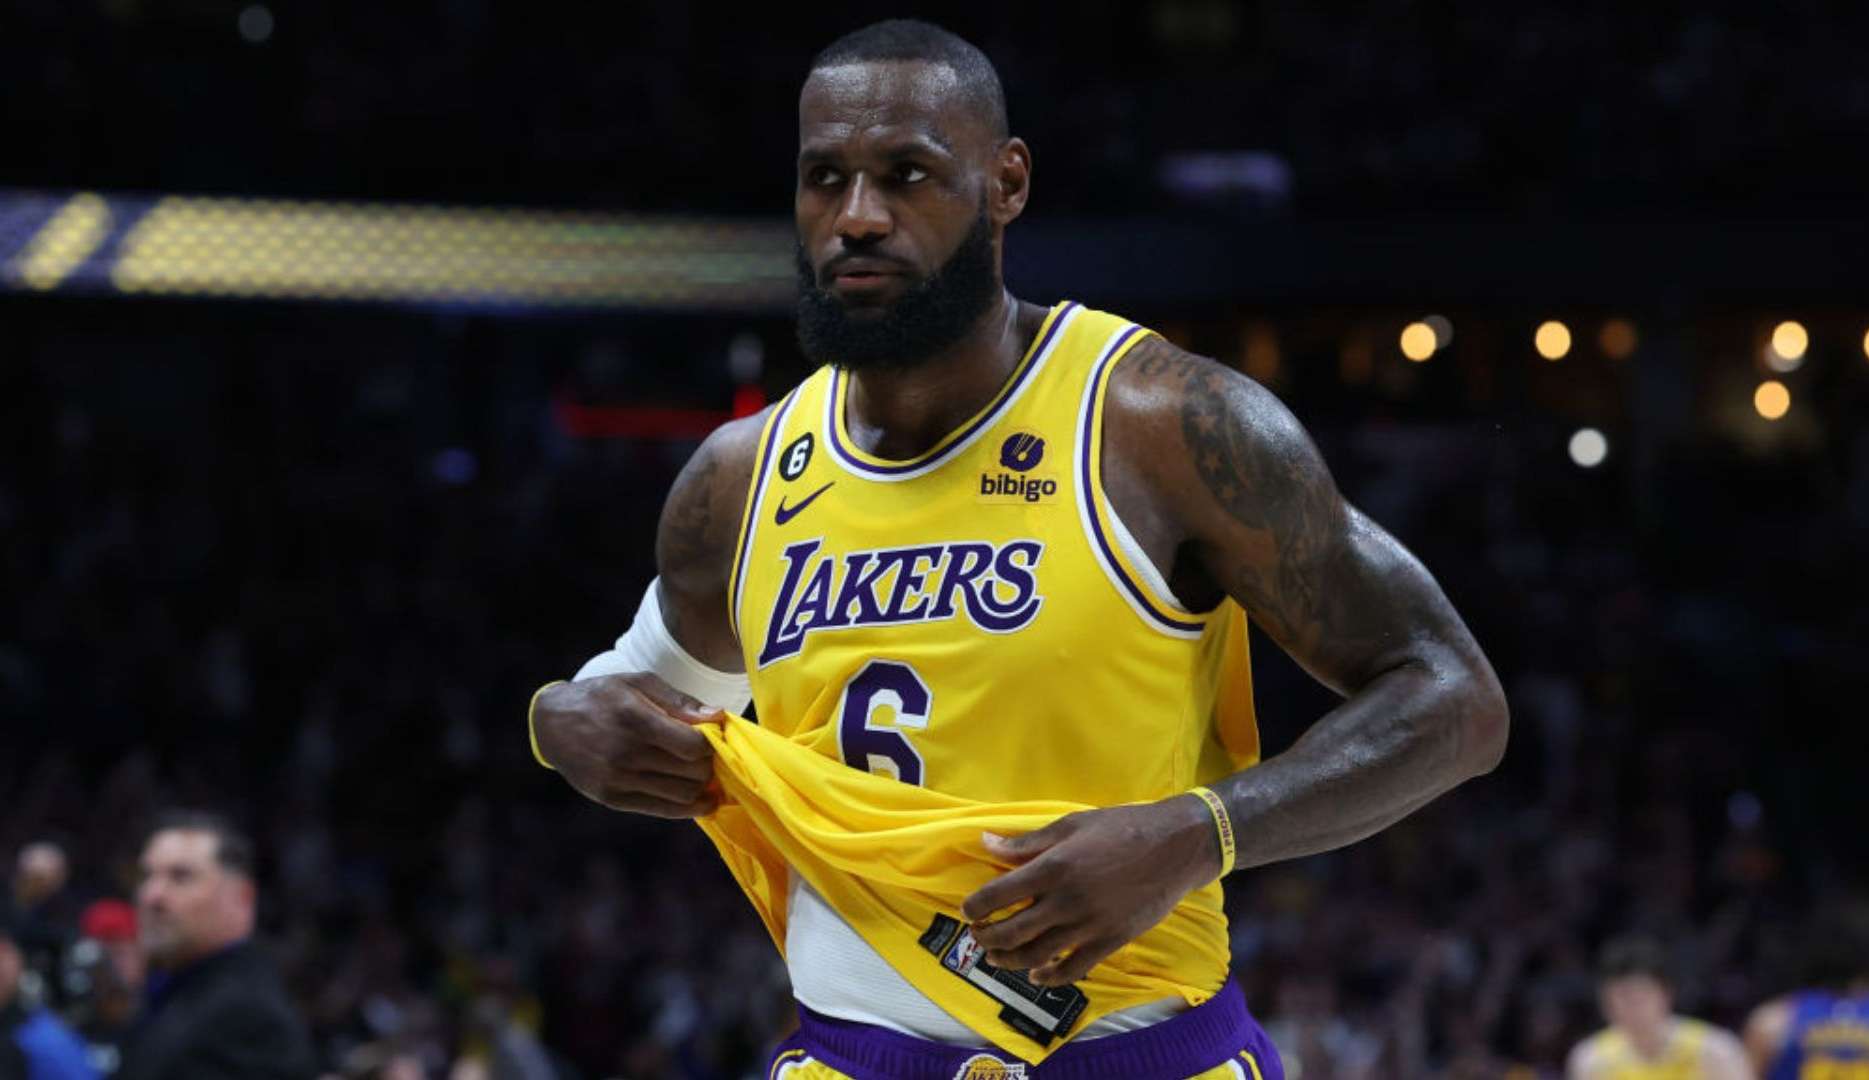 LeBron James and the Lakers will talk about the player's